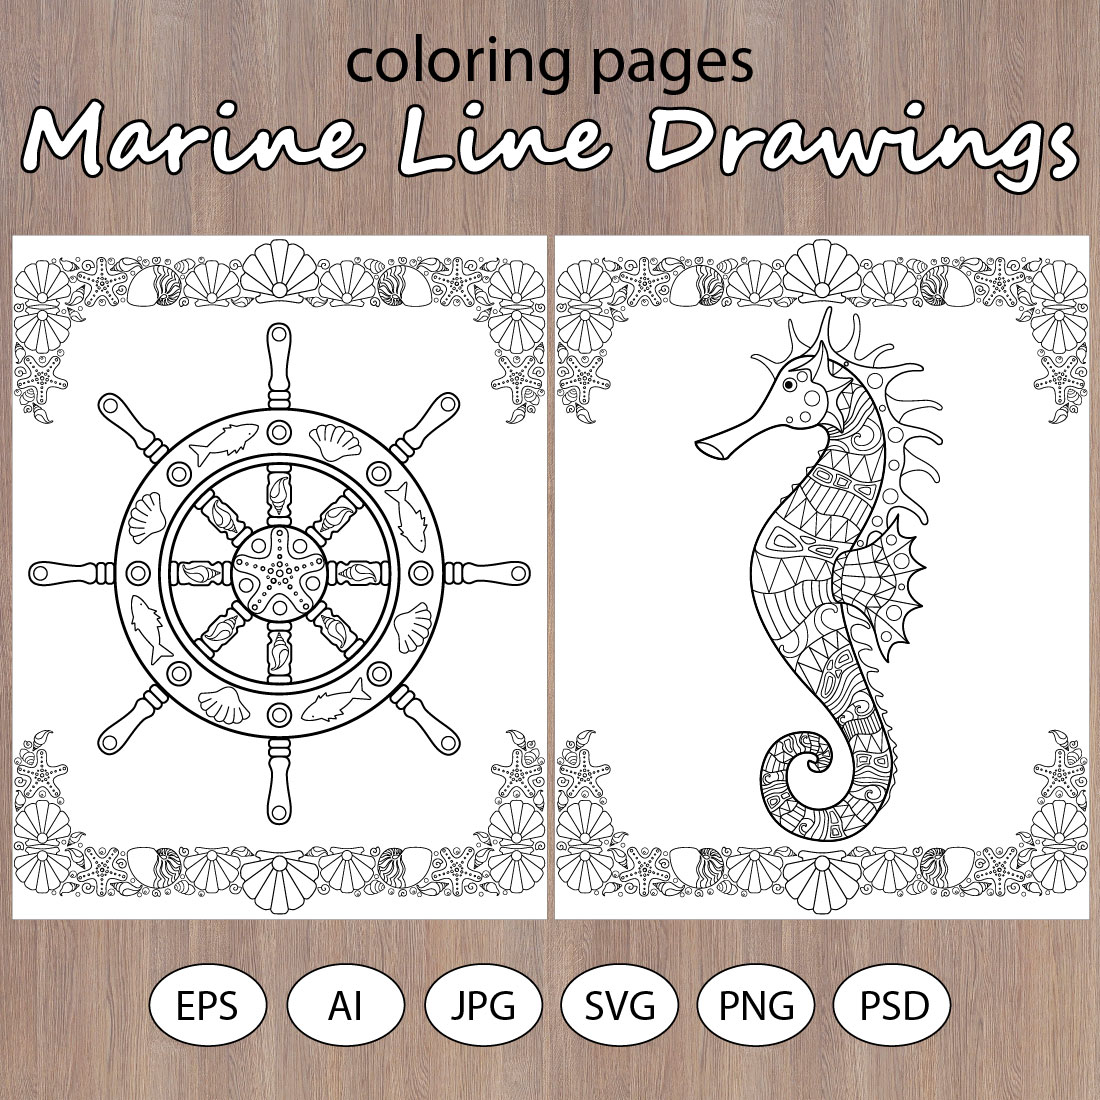 7 Marine Line Drawings for coloring cover image.